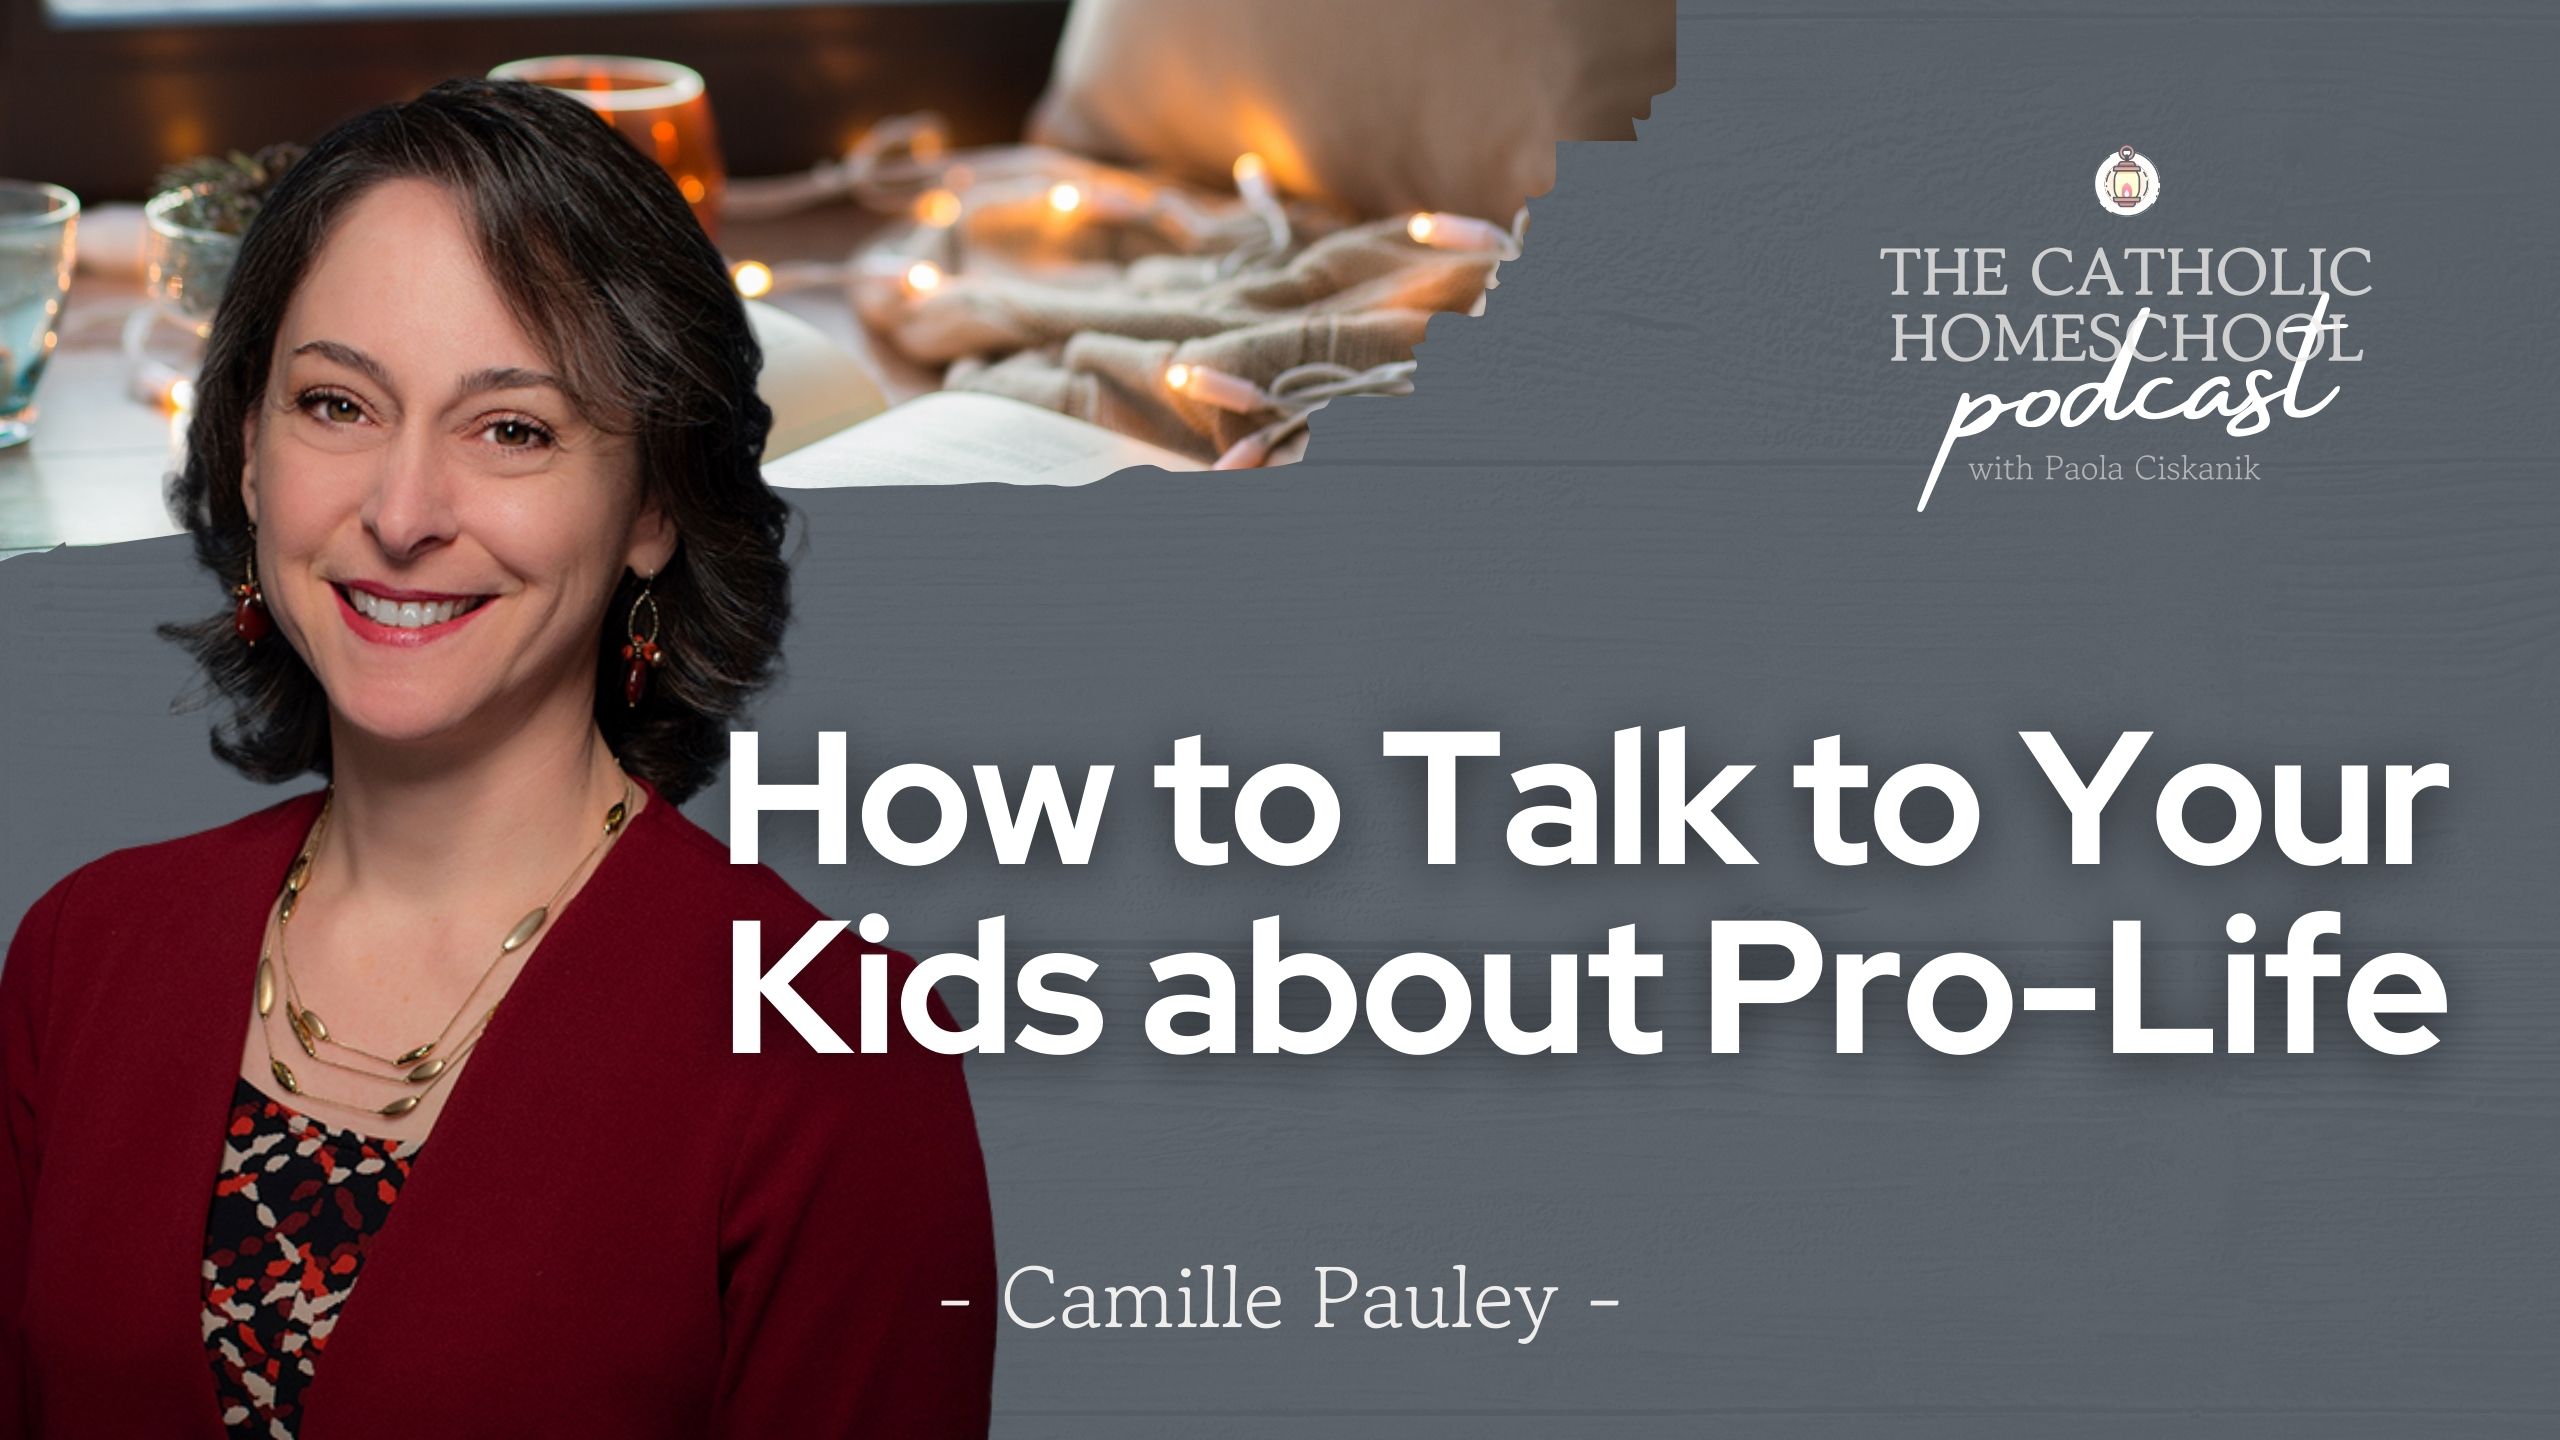 Camille Pauley | How to Talk to Your Kids About Pro-Life | The Catholic Homeschool Podcast